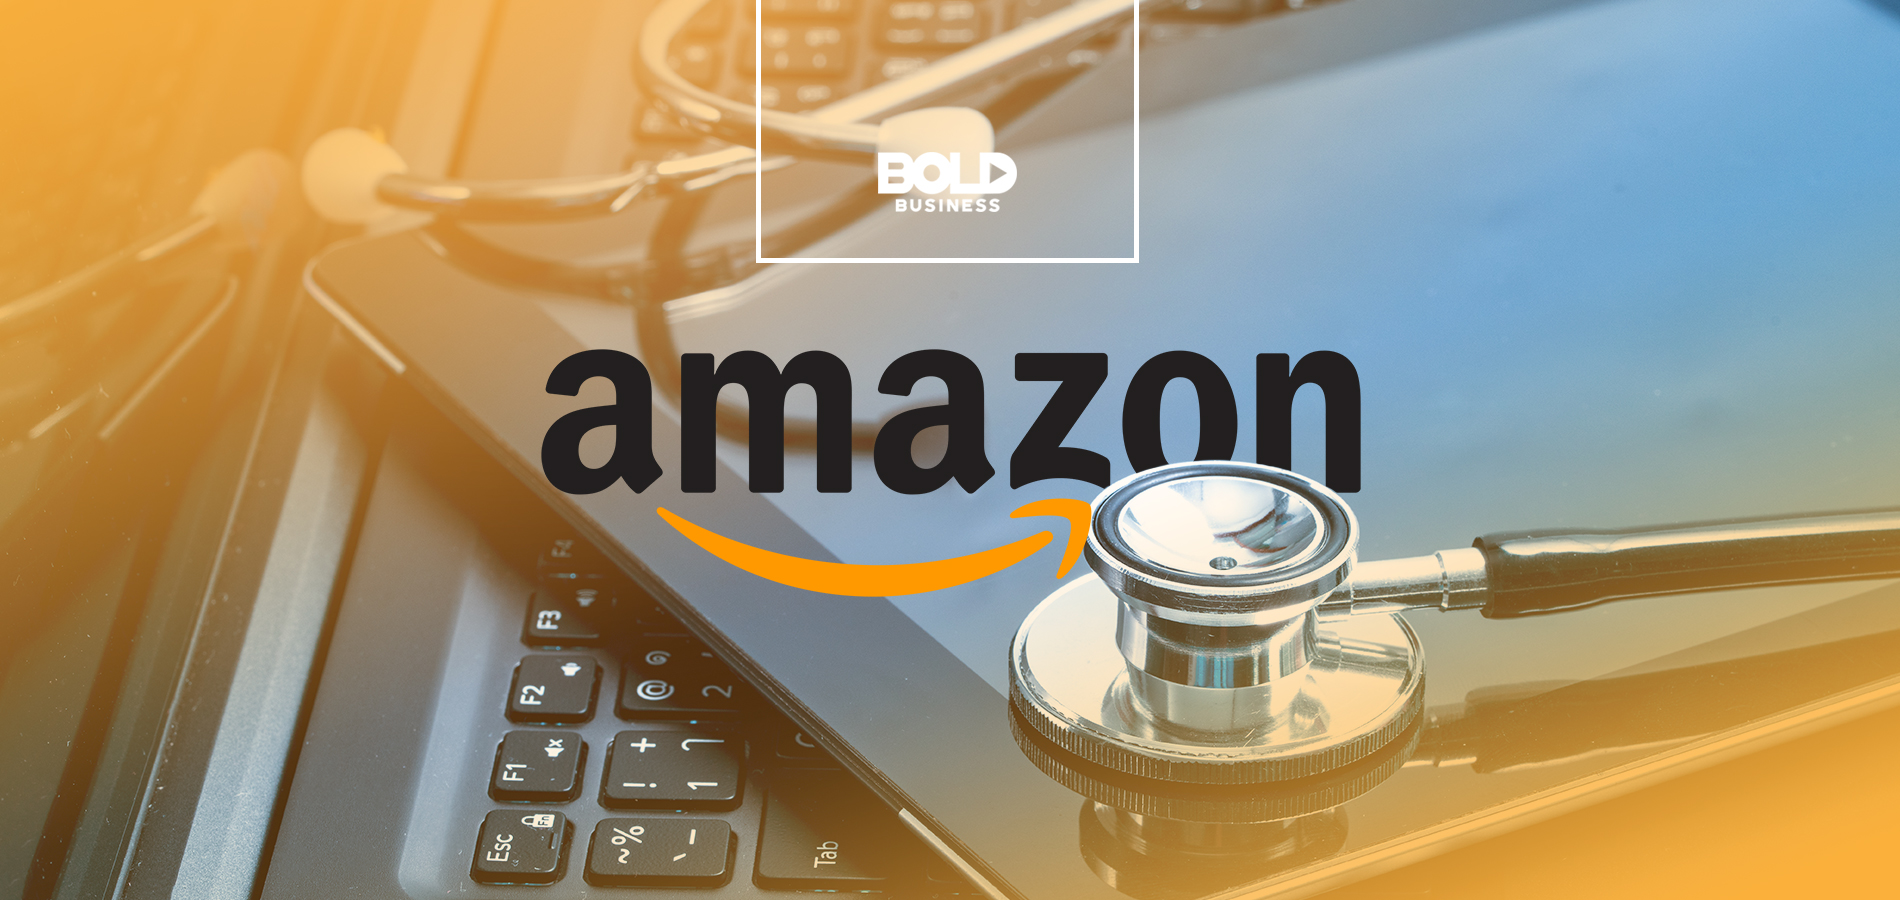 a photo of Amazon's logo beside a stethoscope on top of an ipad and a keyboard amidst talks about an Amazon Healthcare Company